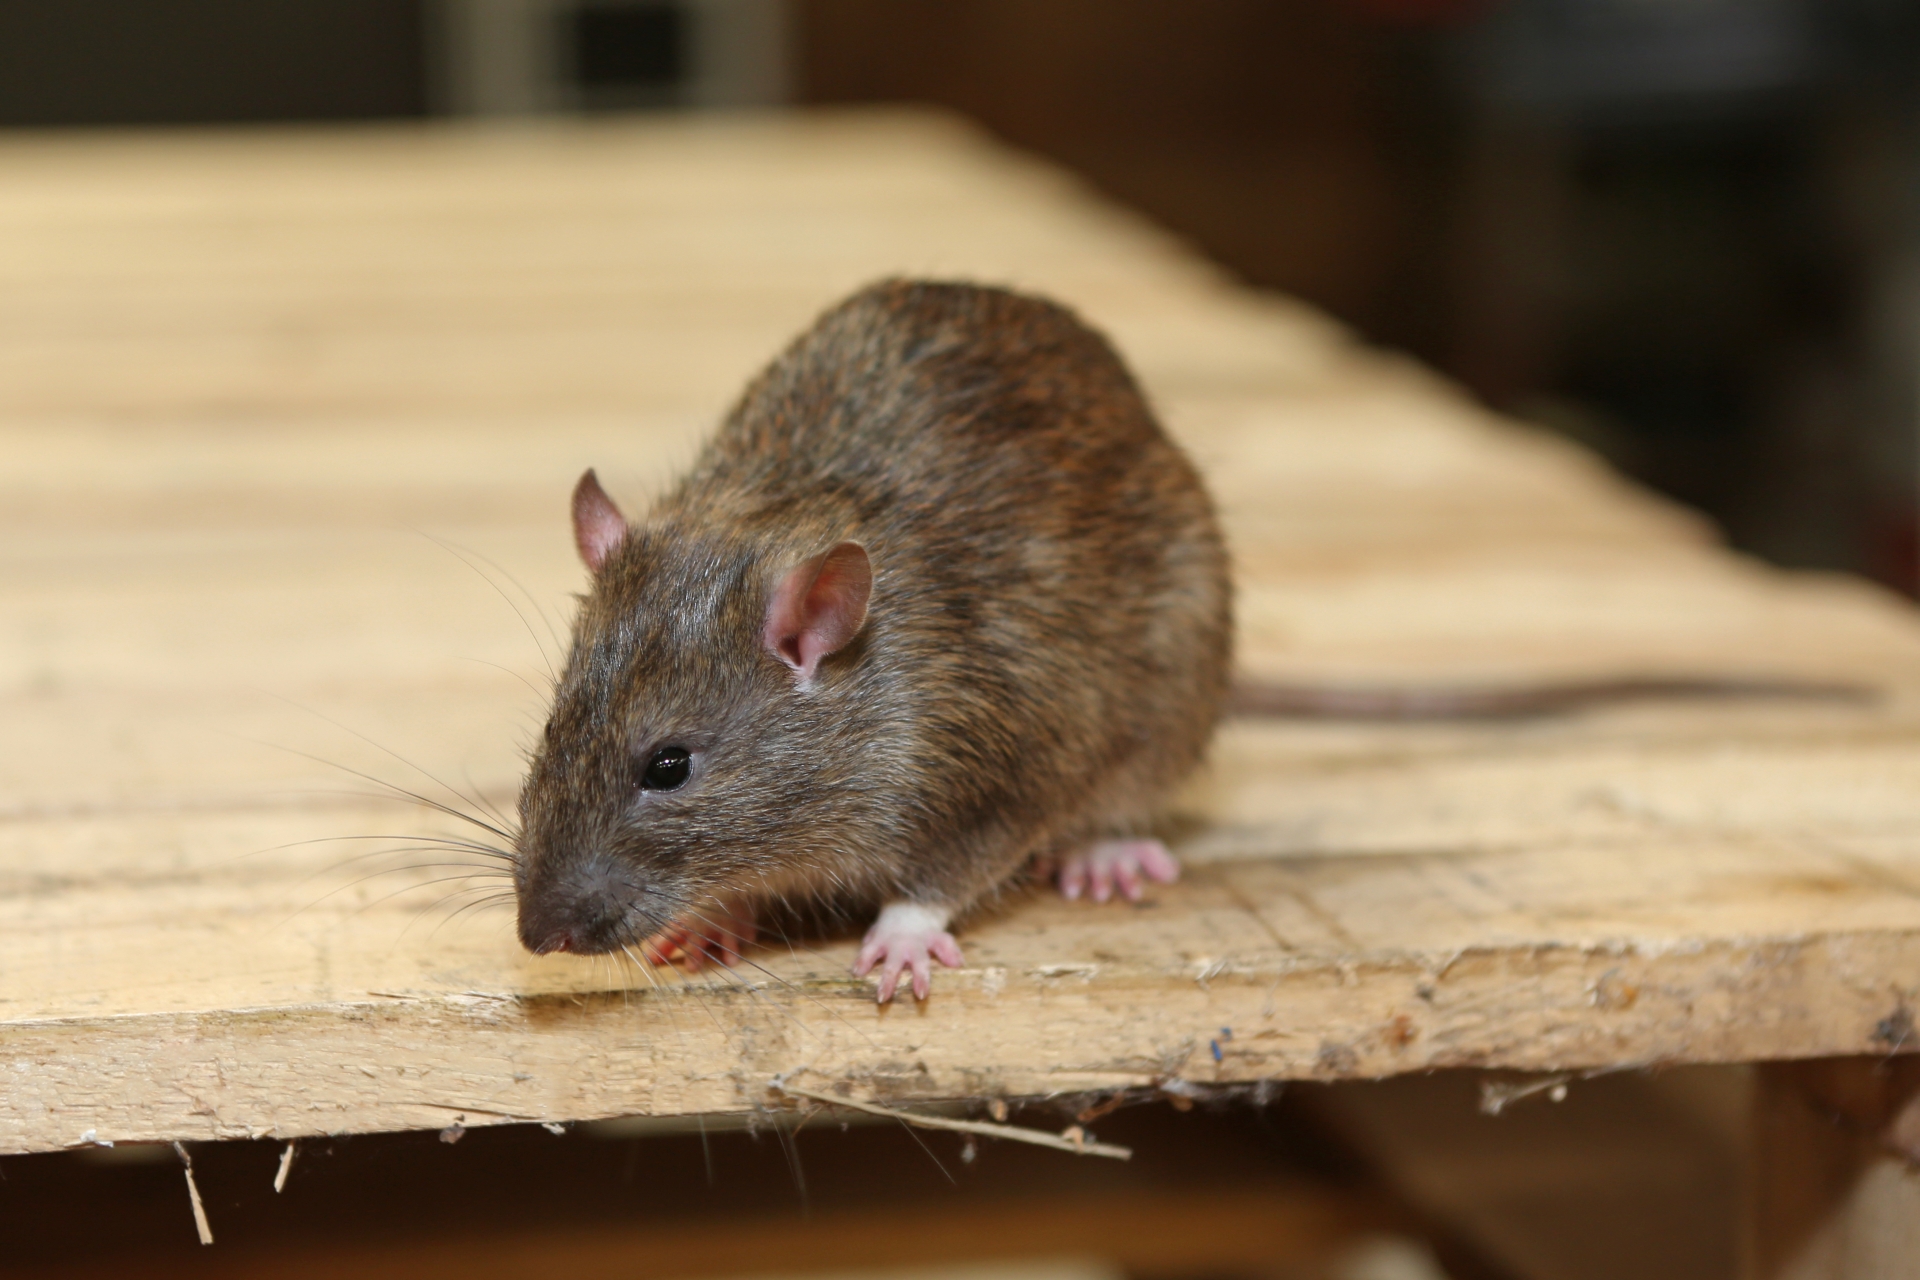 Rat extermination, Pest Control in Hampstead, NW3 . Call Now 020 8166 9746